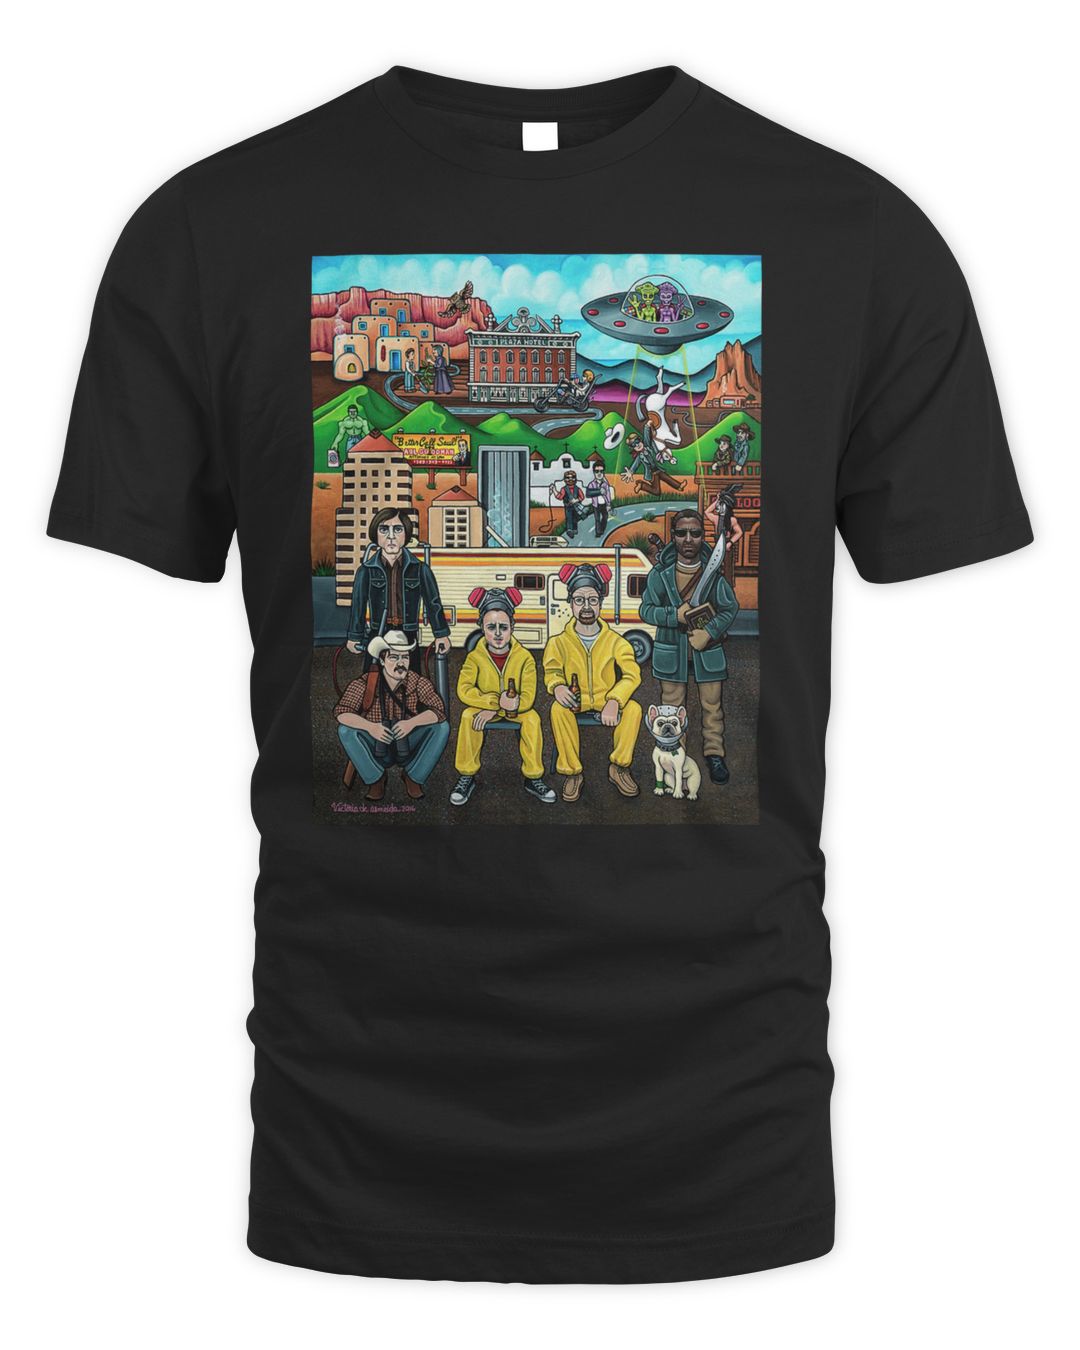 Better Call Saul Merch Shooting Stars In New Mexico Shirt